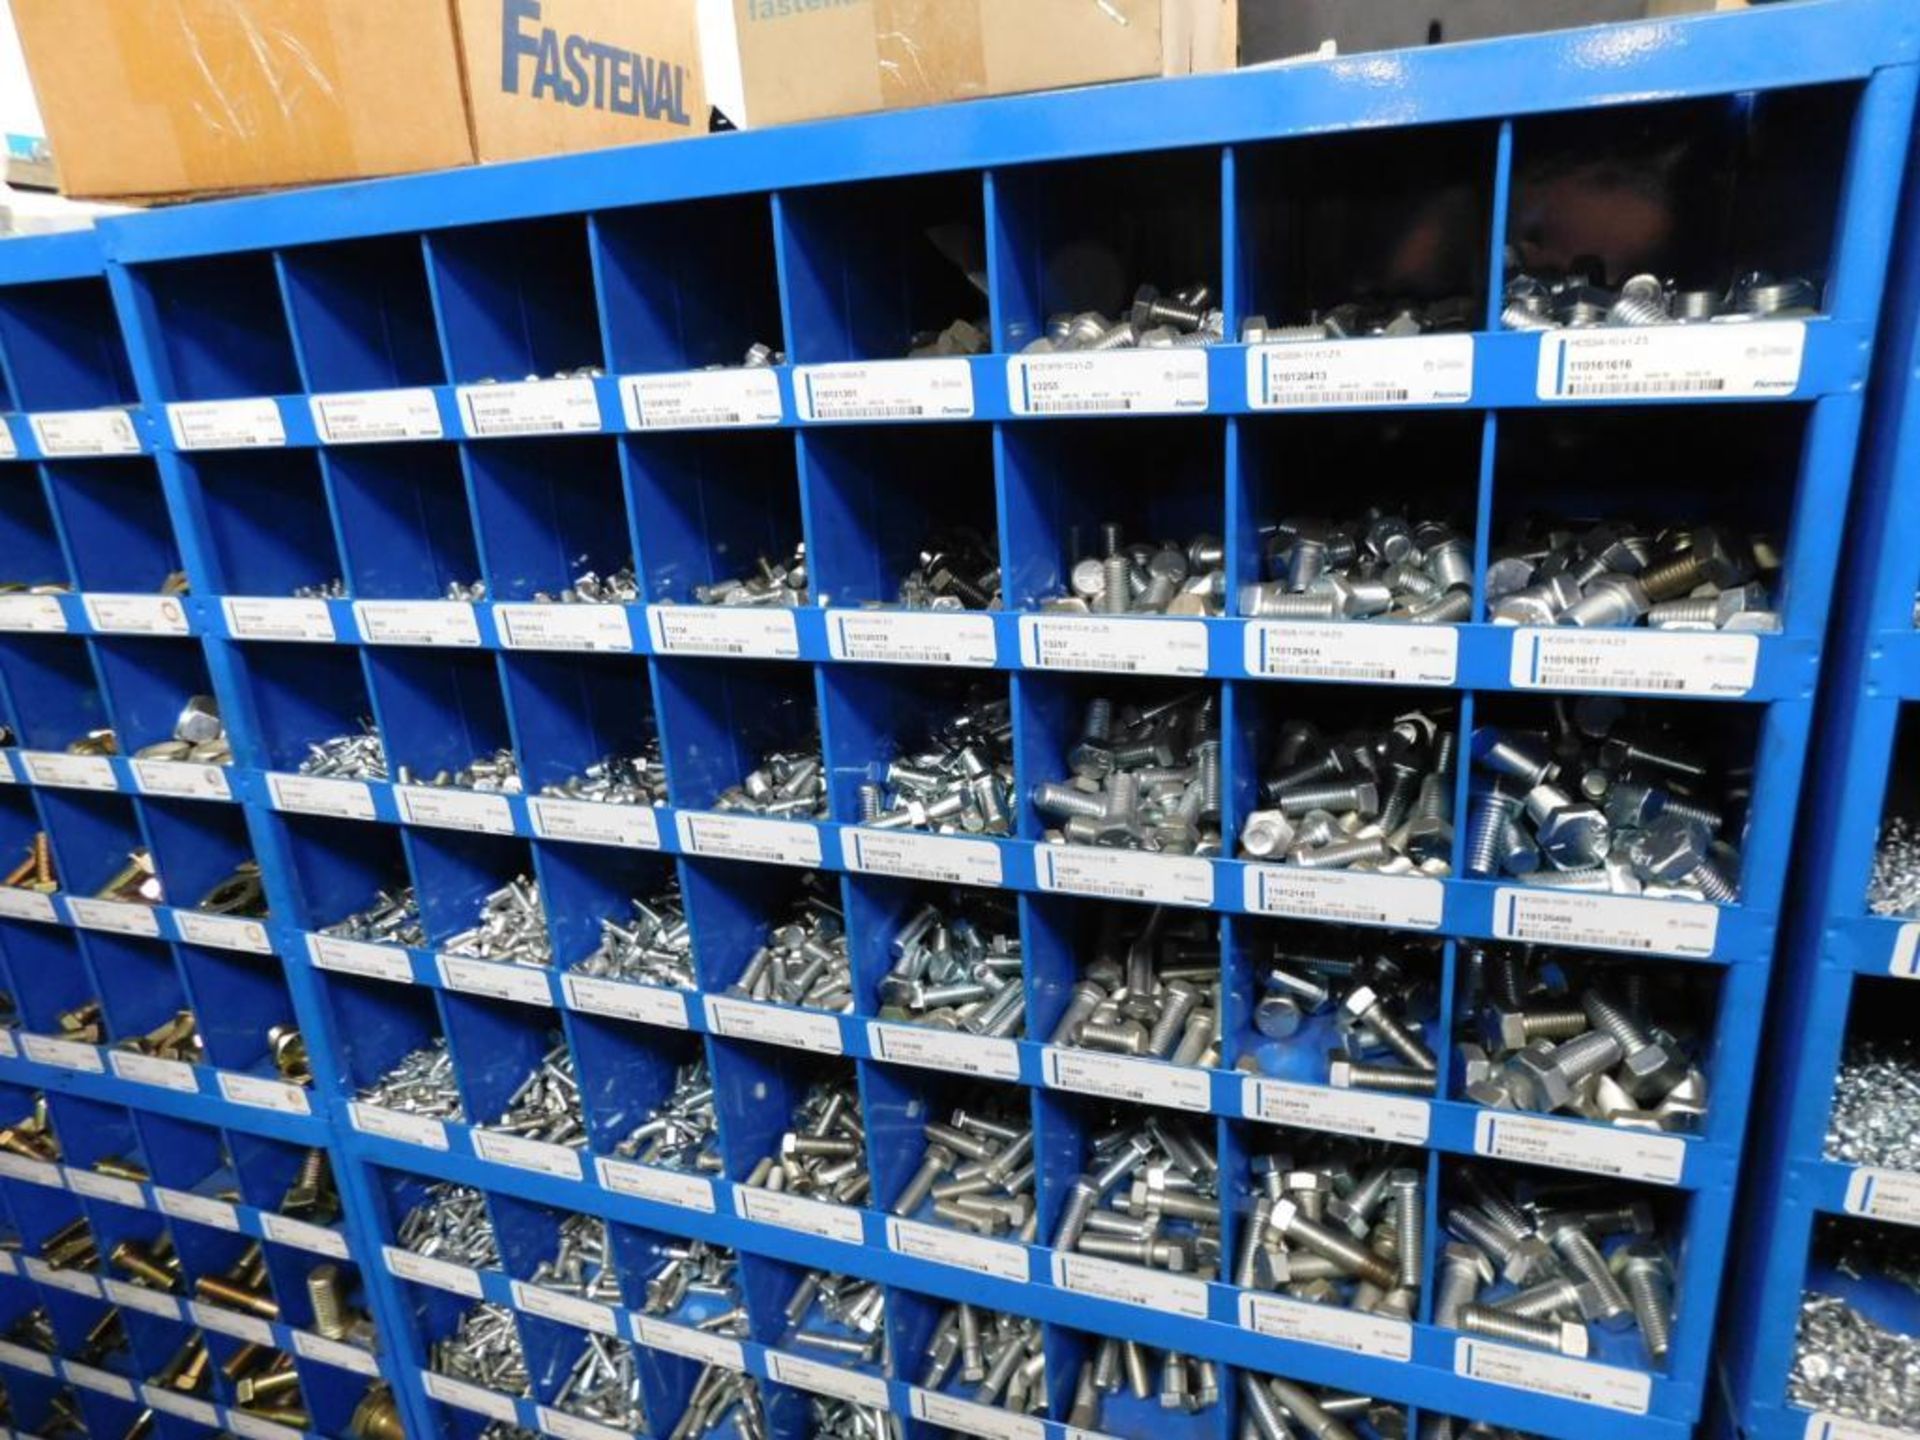 LOT: (5) Sections Fastenal Compartment Organizers w/Contents of Assorted Hardware, Bolts, Screws, et - Image 6 of 11